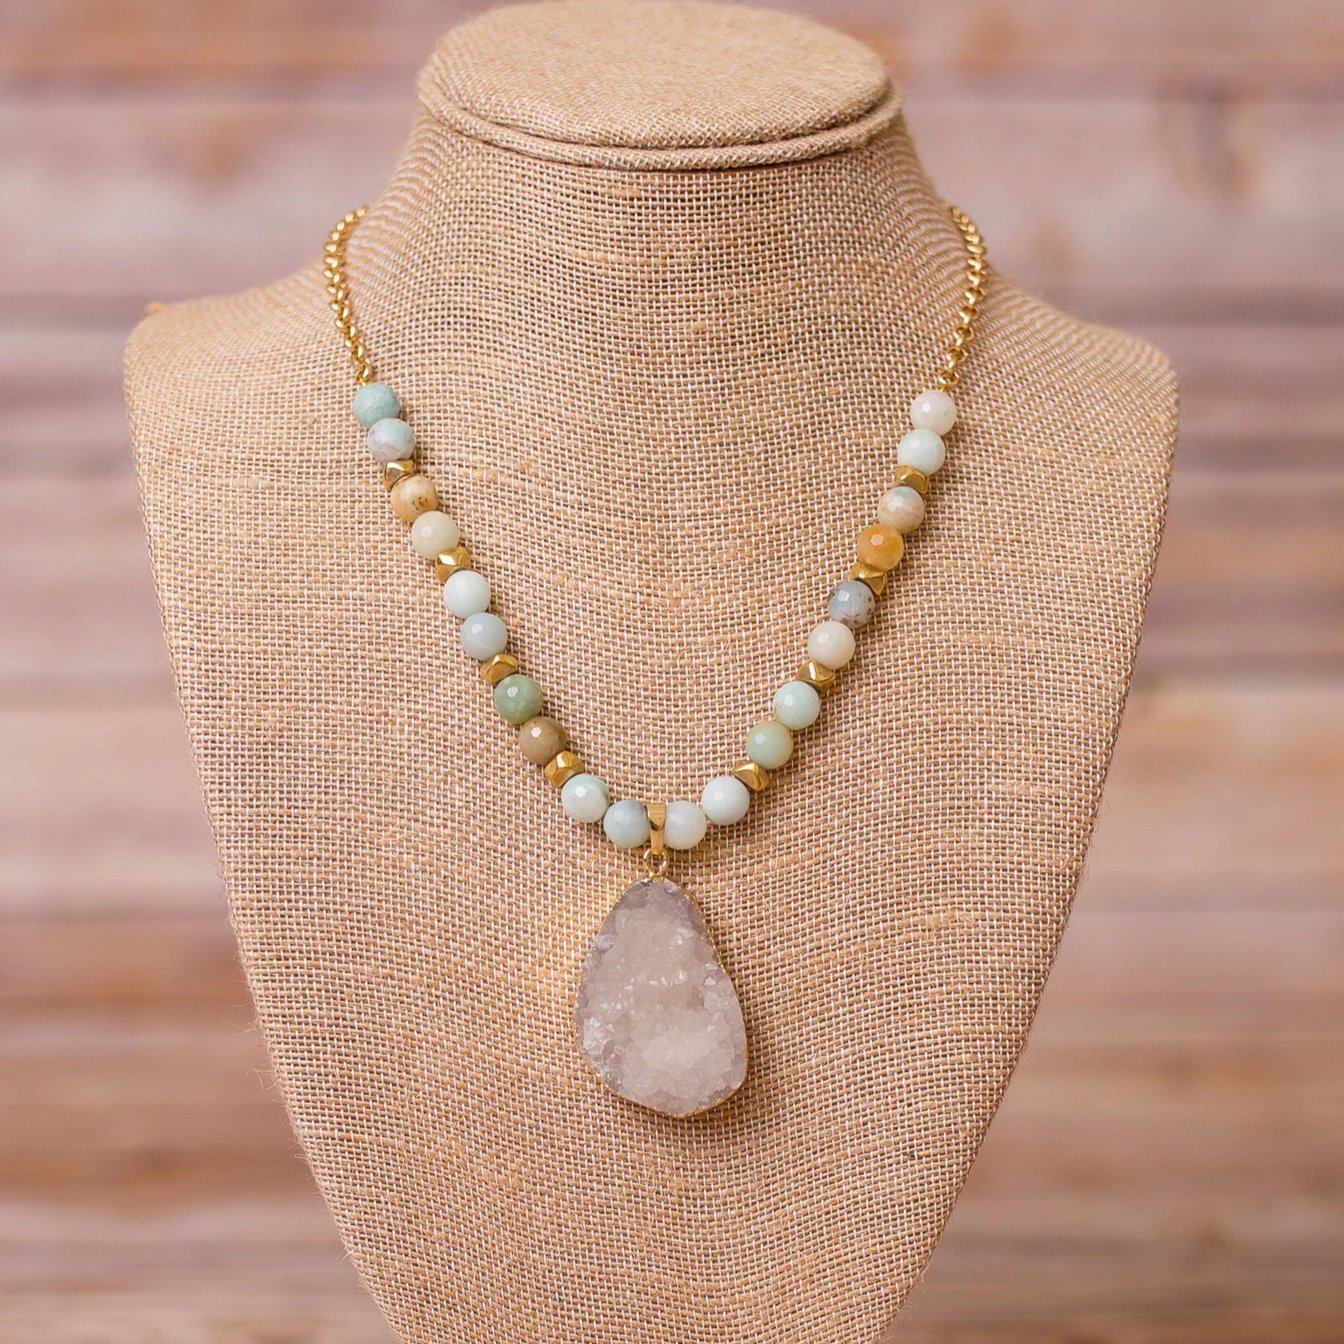 Short Beaded Necklace with Druzy Pendant